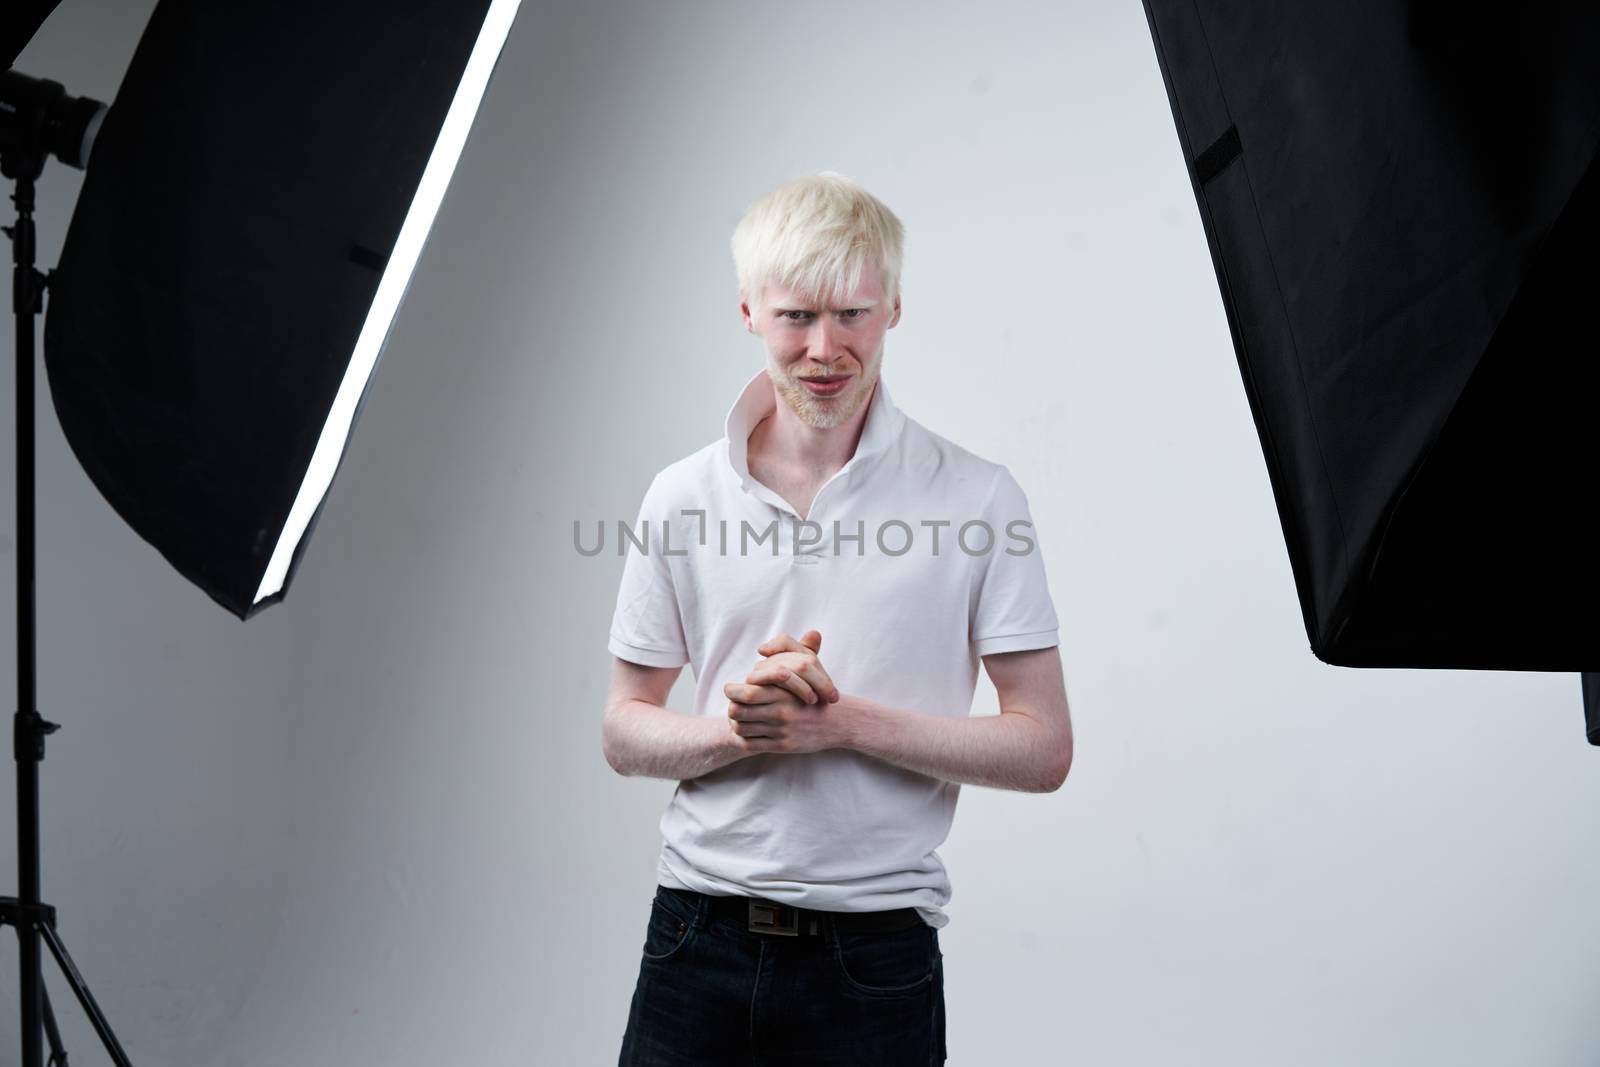 albinism Serious albino man white skin hair studio dressed t-shirt standing flash light. abnormal deviations. unusual appearance. skin abnormality Beautiful people with special appearance.